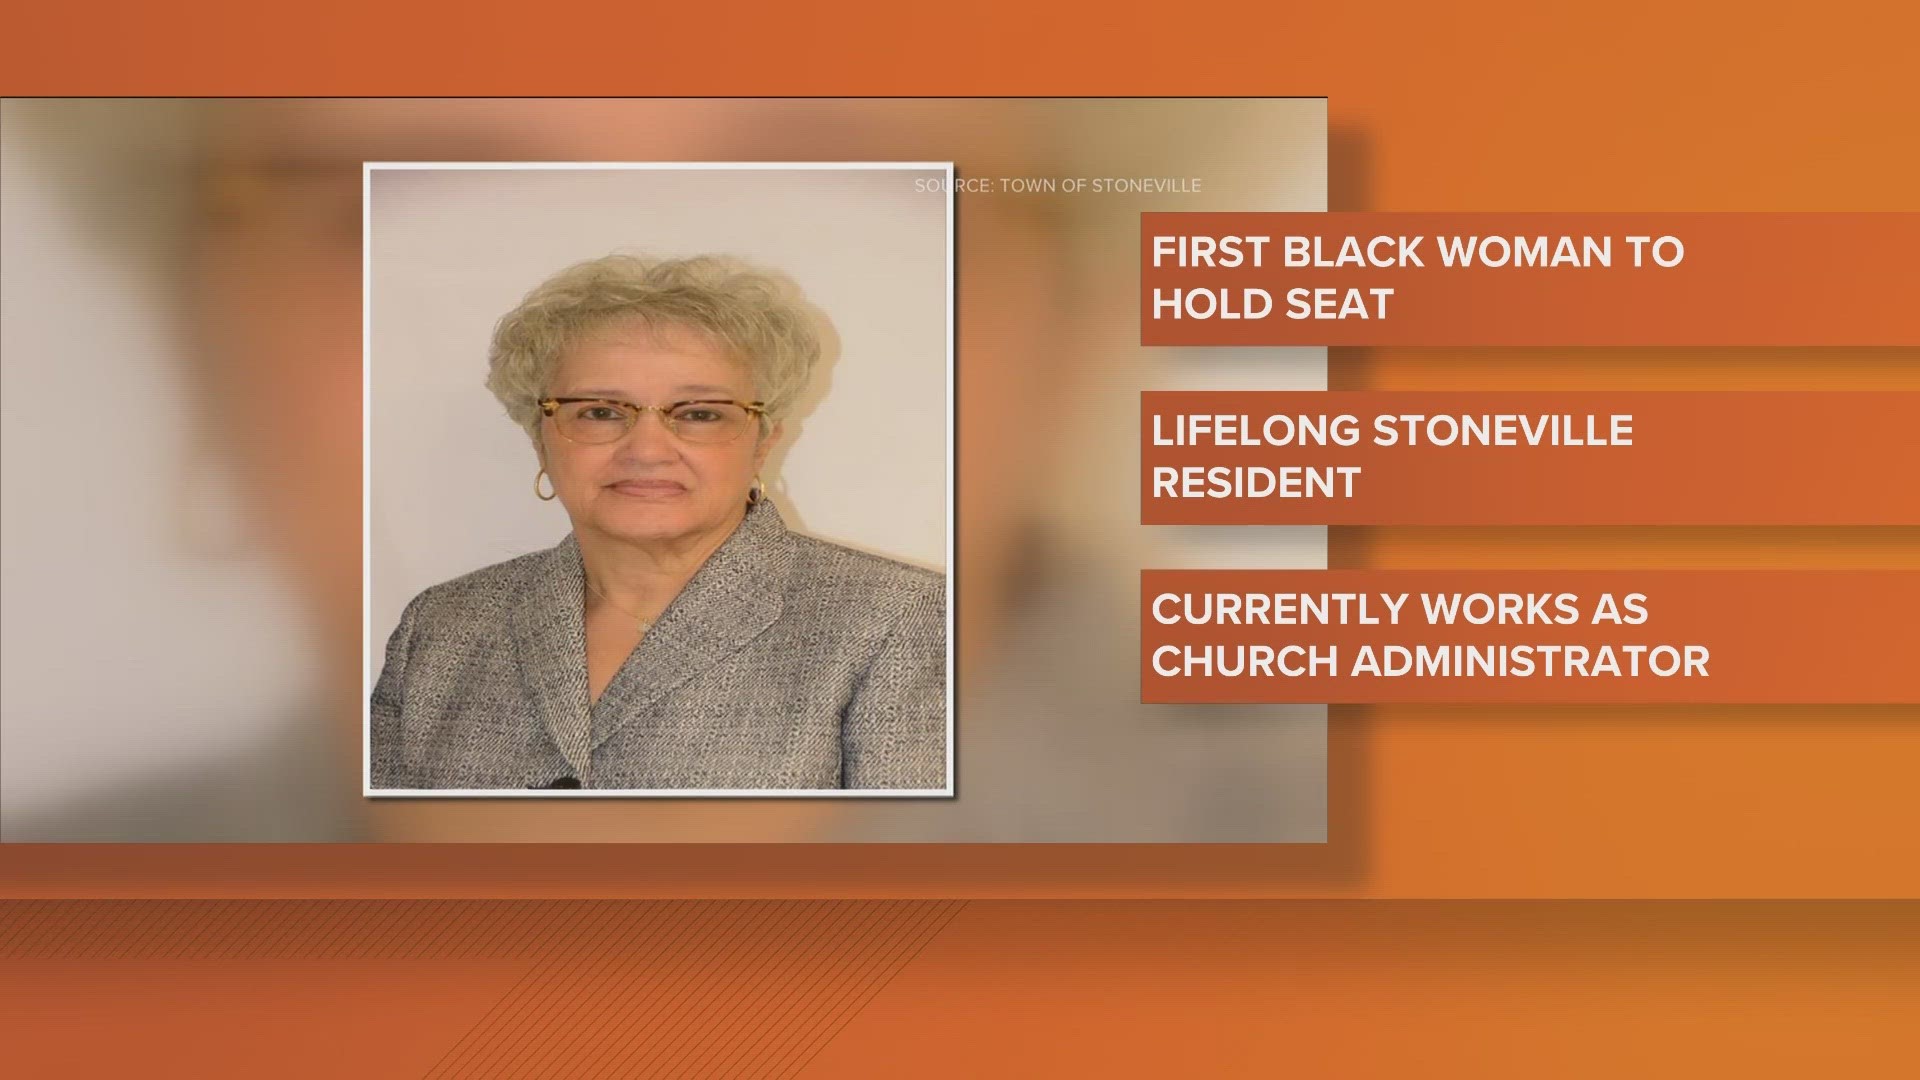 A woman in Rockingham County made history.